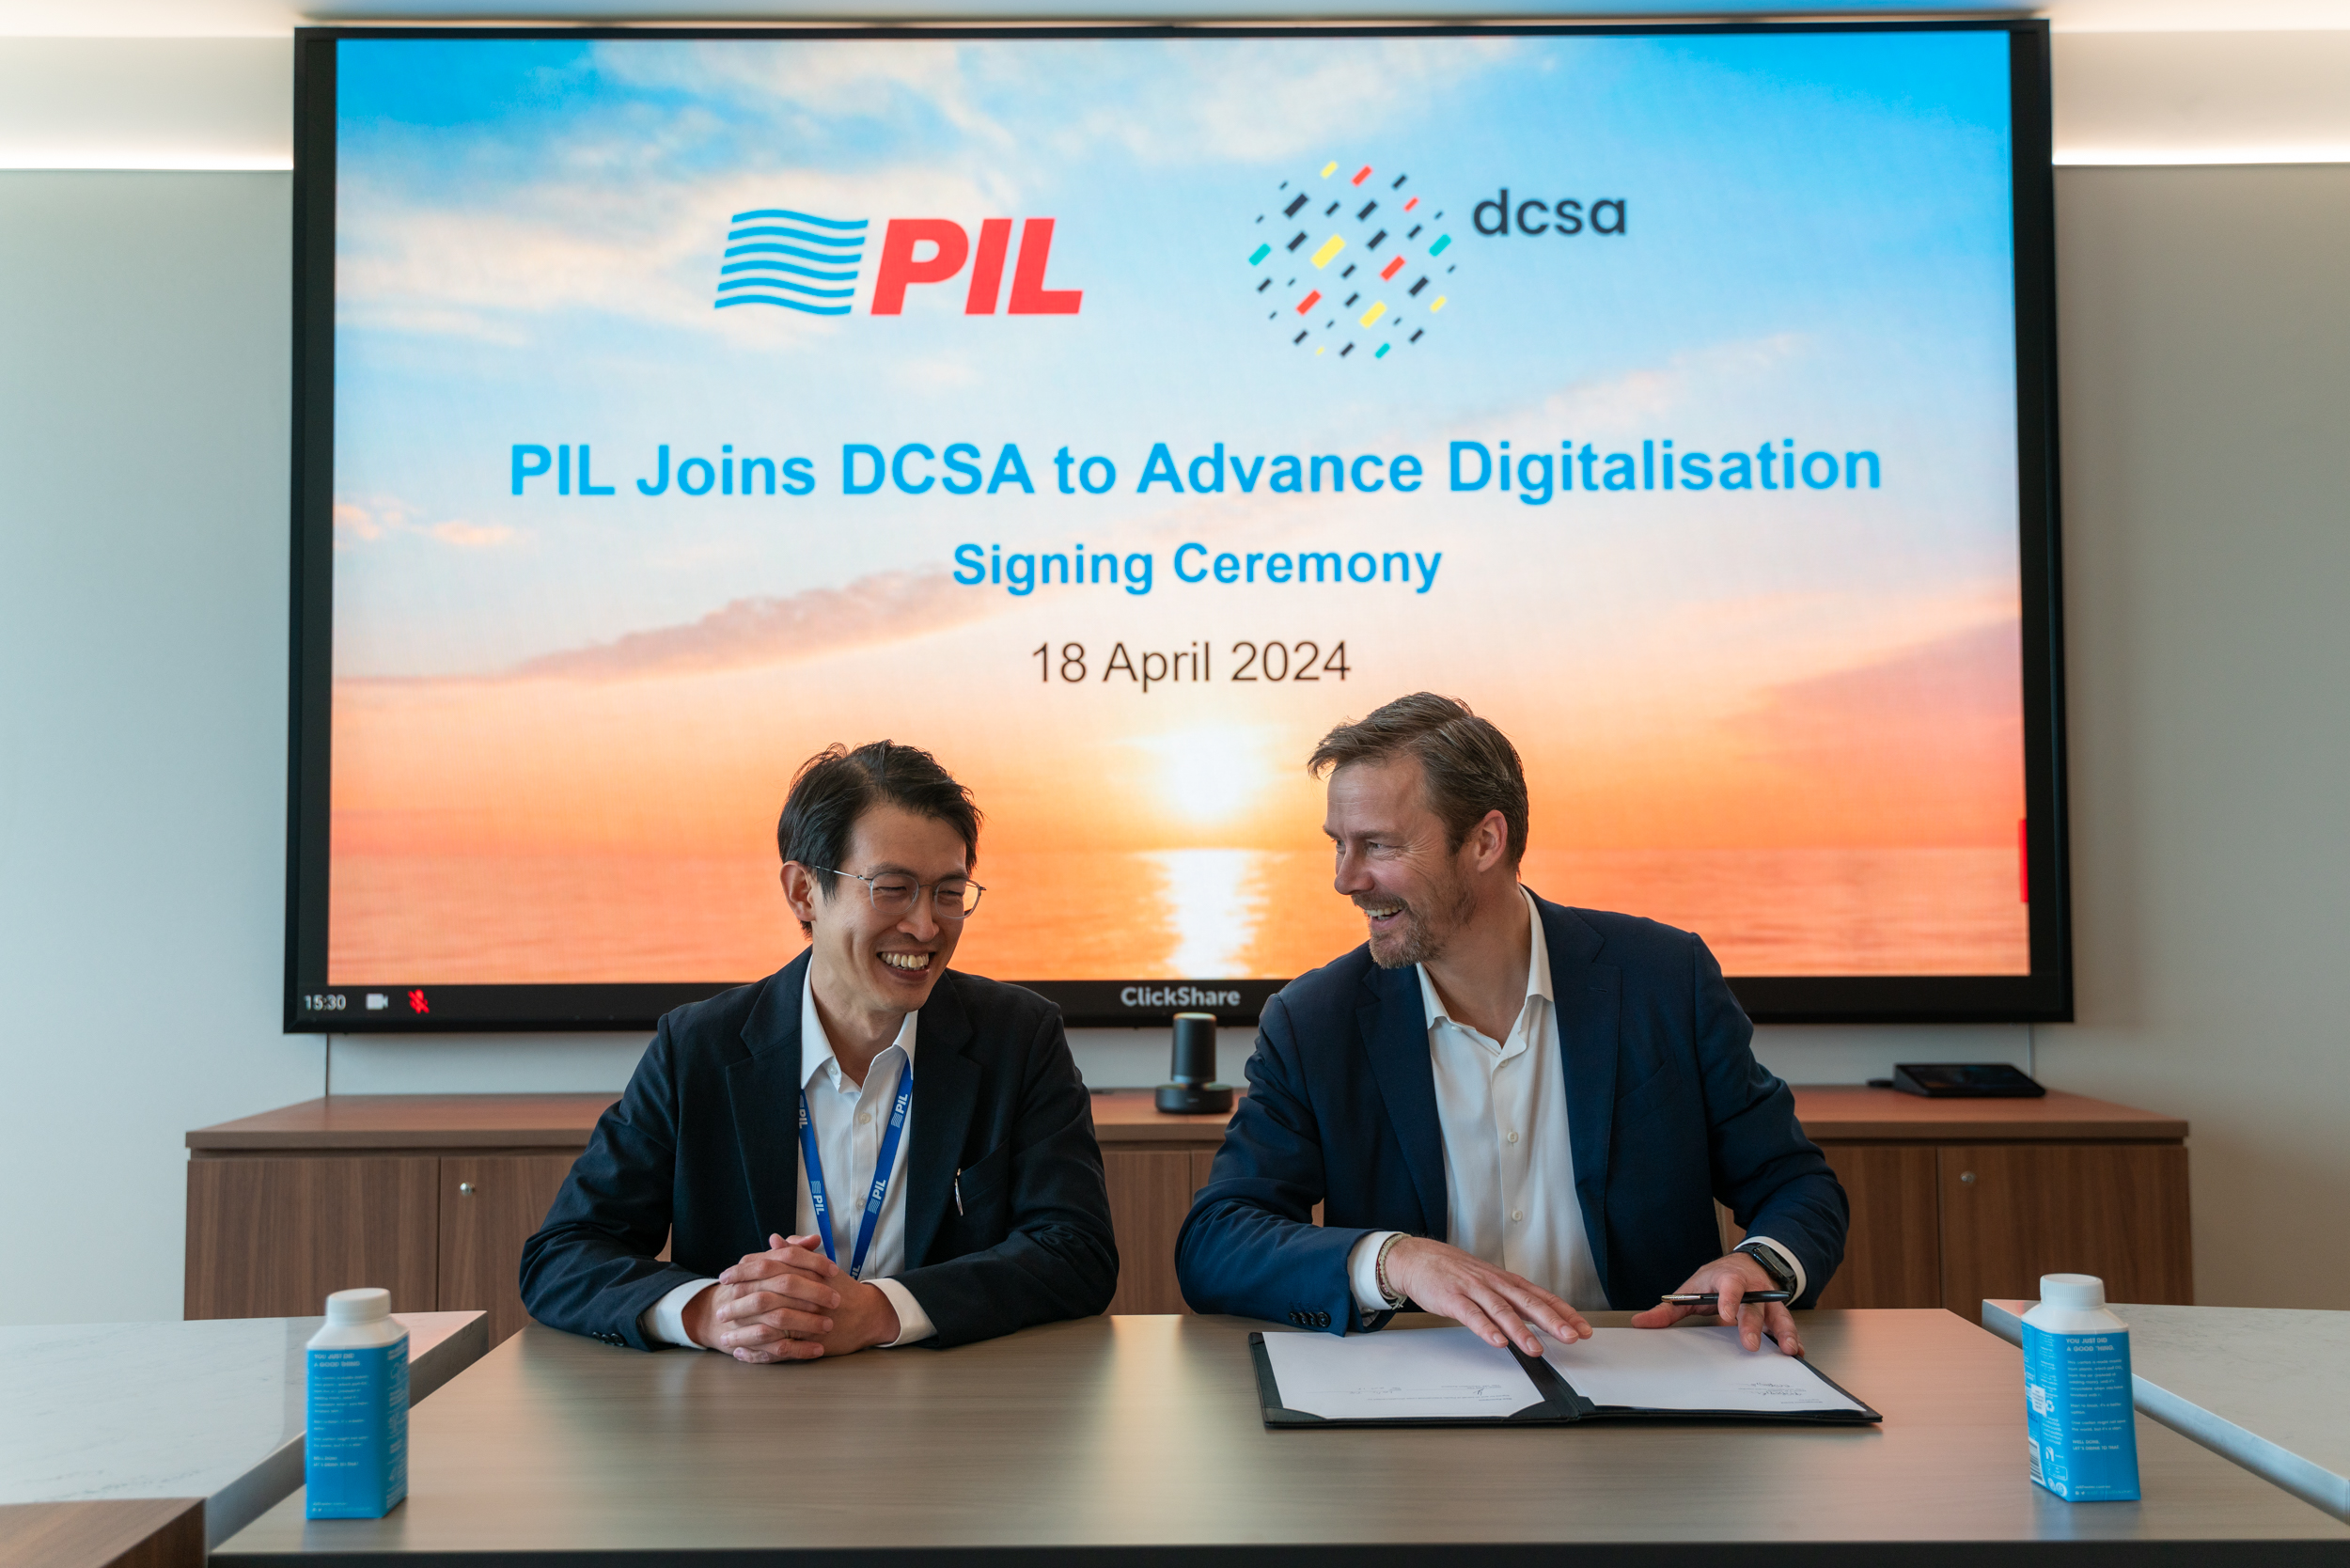 PIL joins DCSA to advance container shipping digita